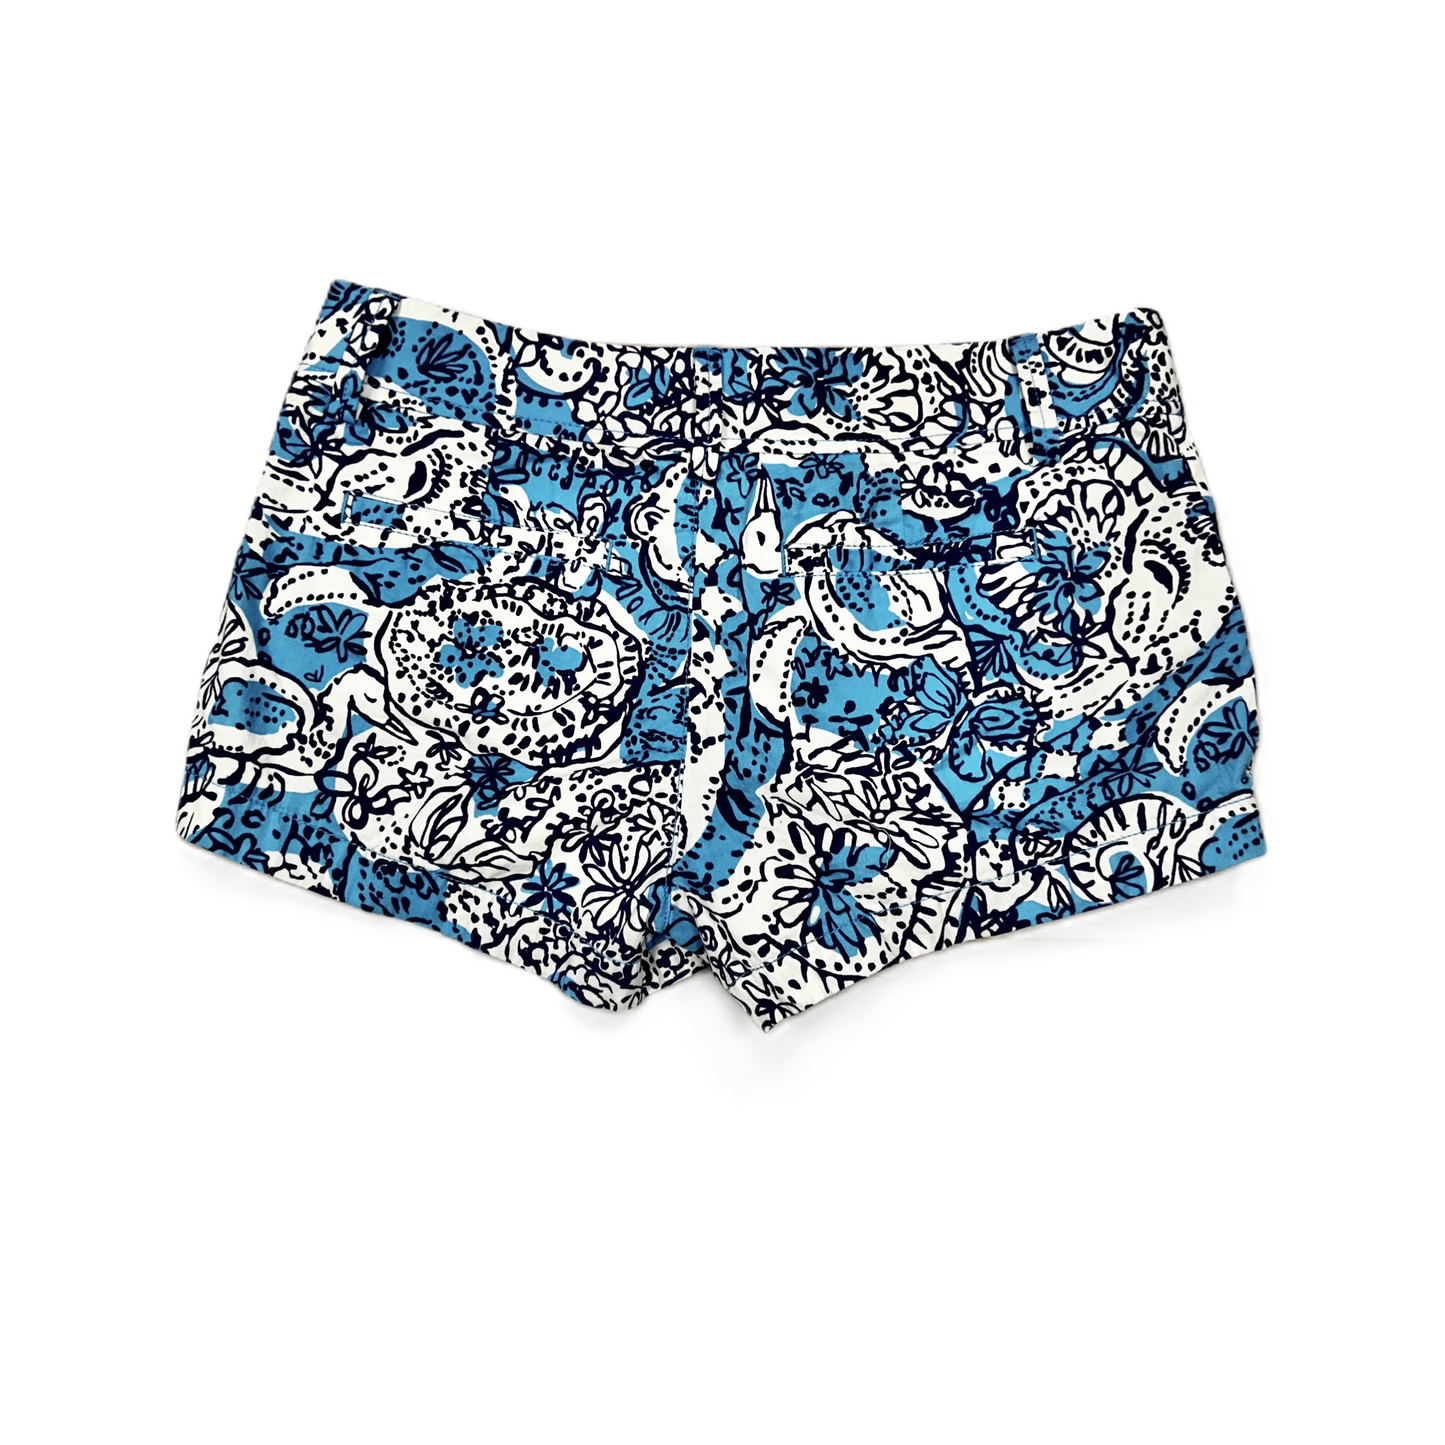 Blue & White Shorts Designer By Lilly Pulitzer, Size: 6